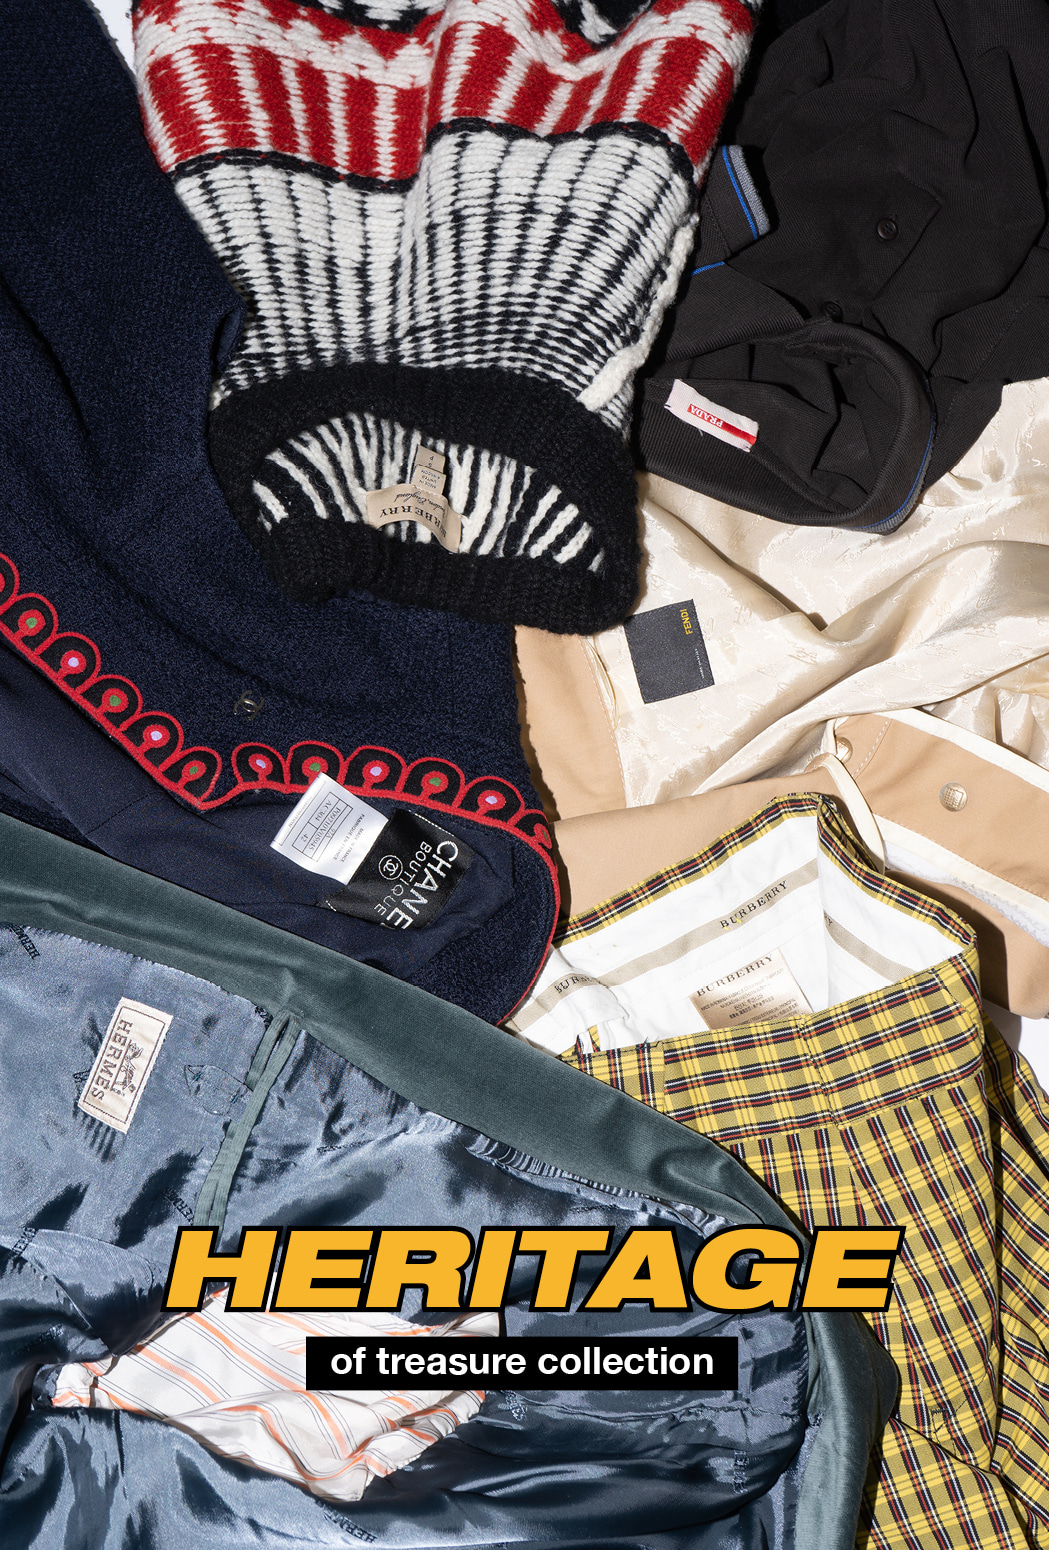 HERITAGE of treasure collection